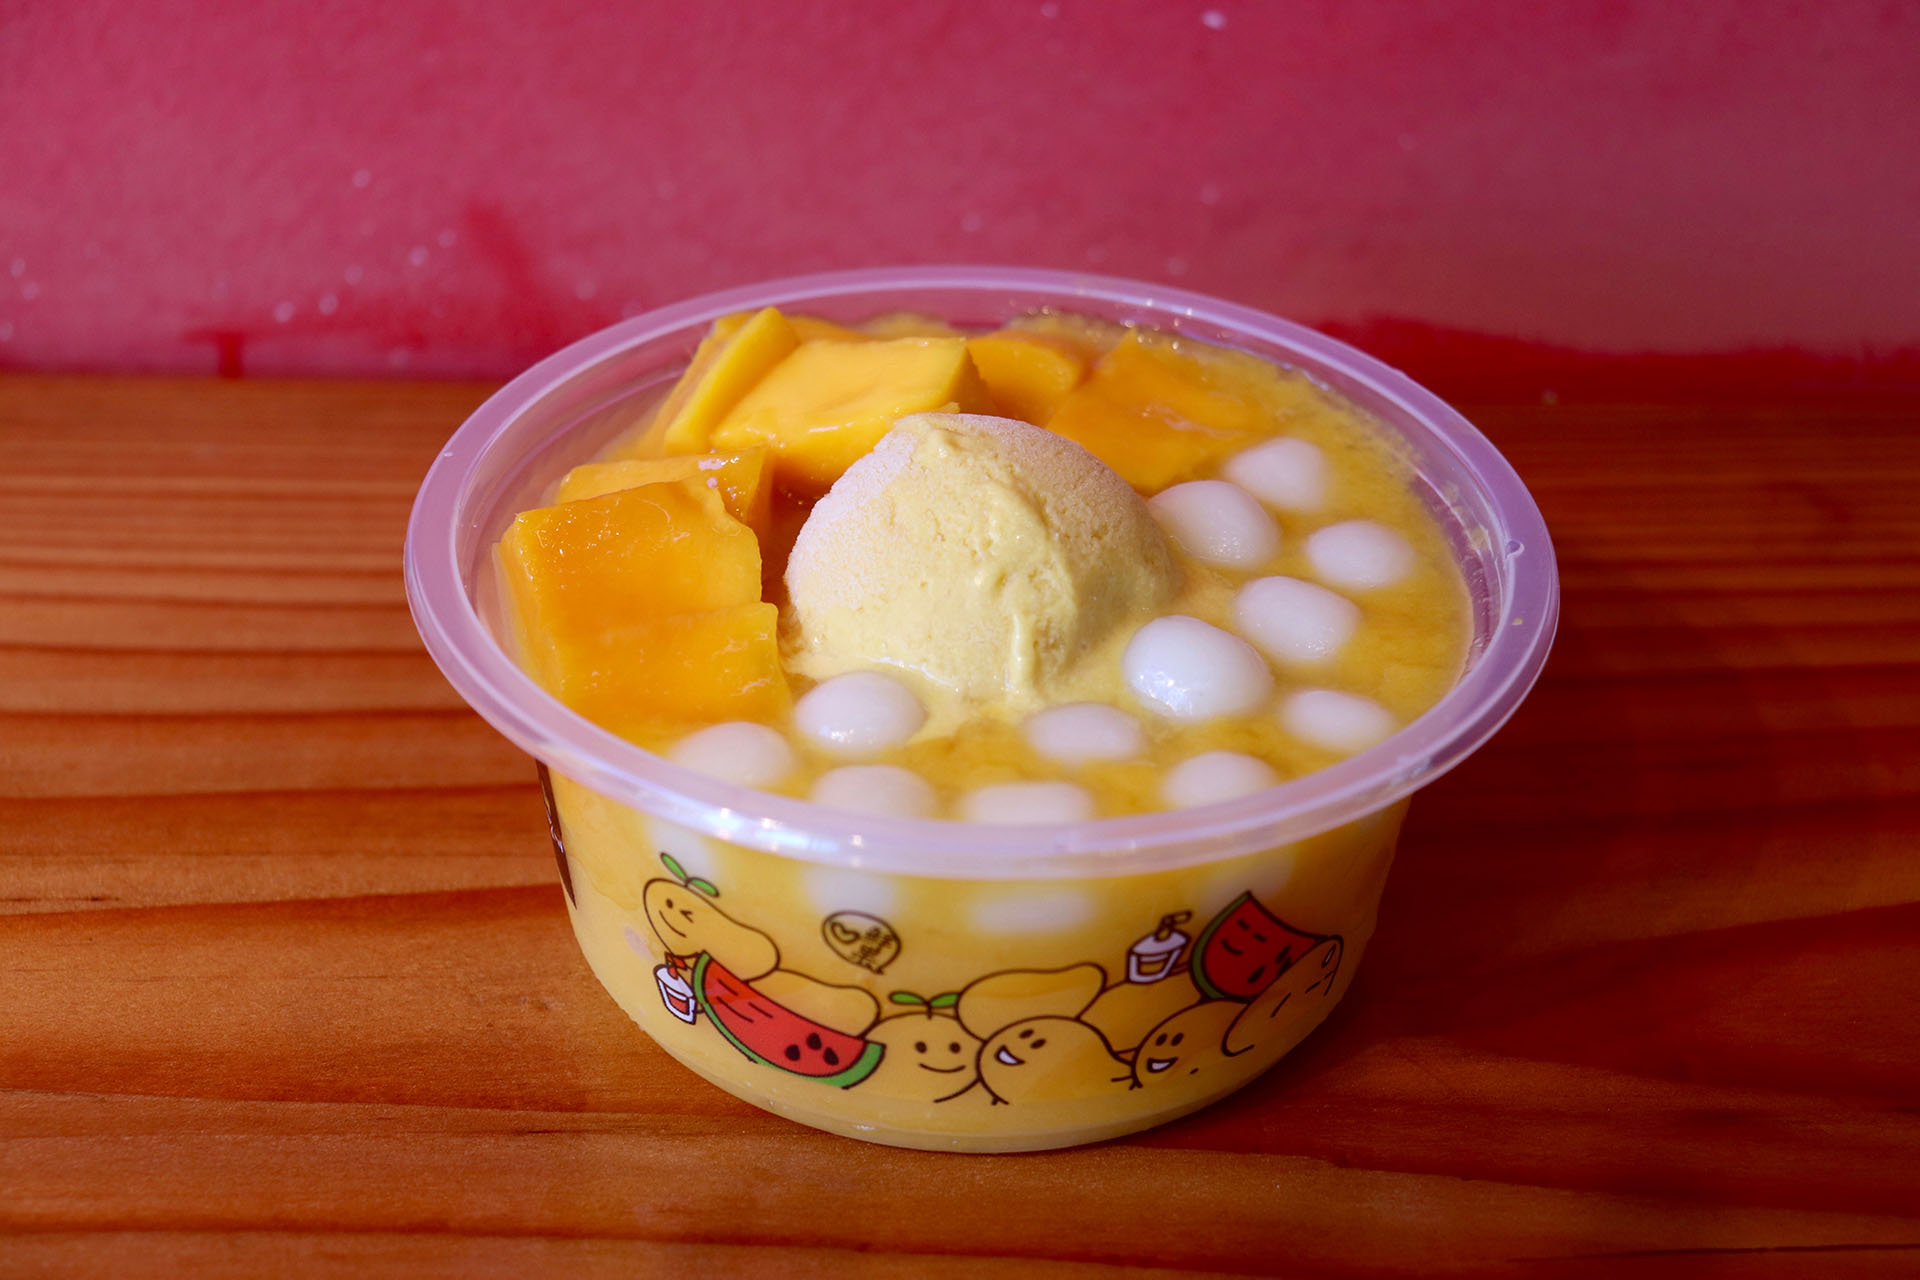 a cold dessert dish that includes mango sorbet, mango chunks and mochi-like balls on a wooden counter